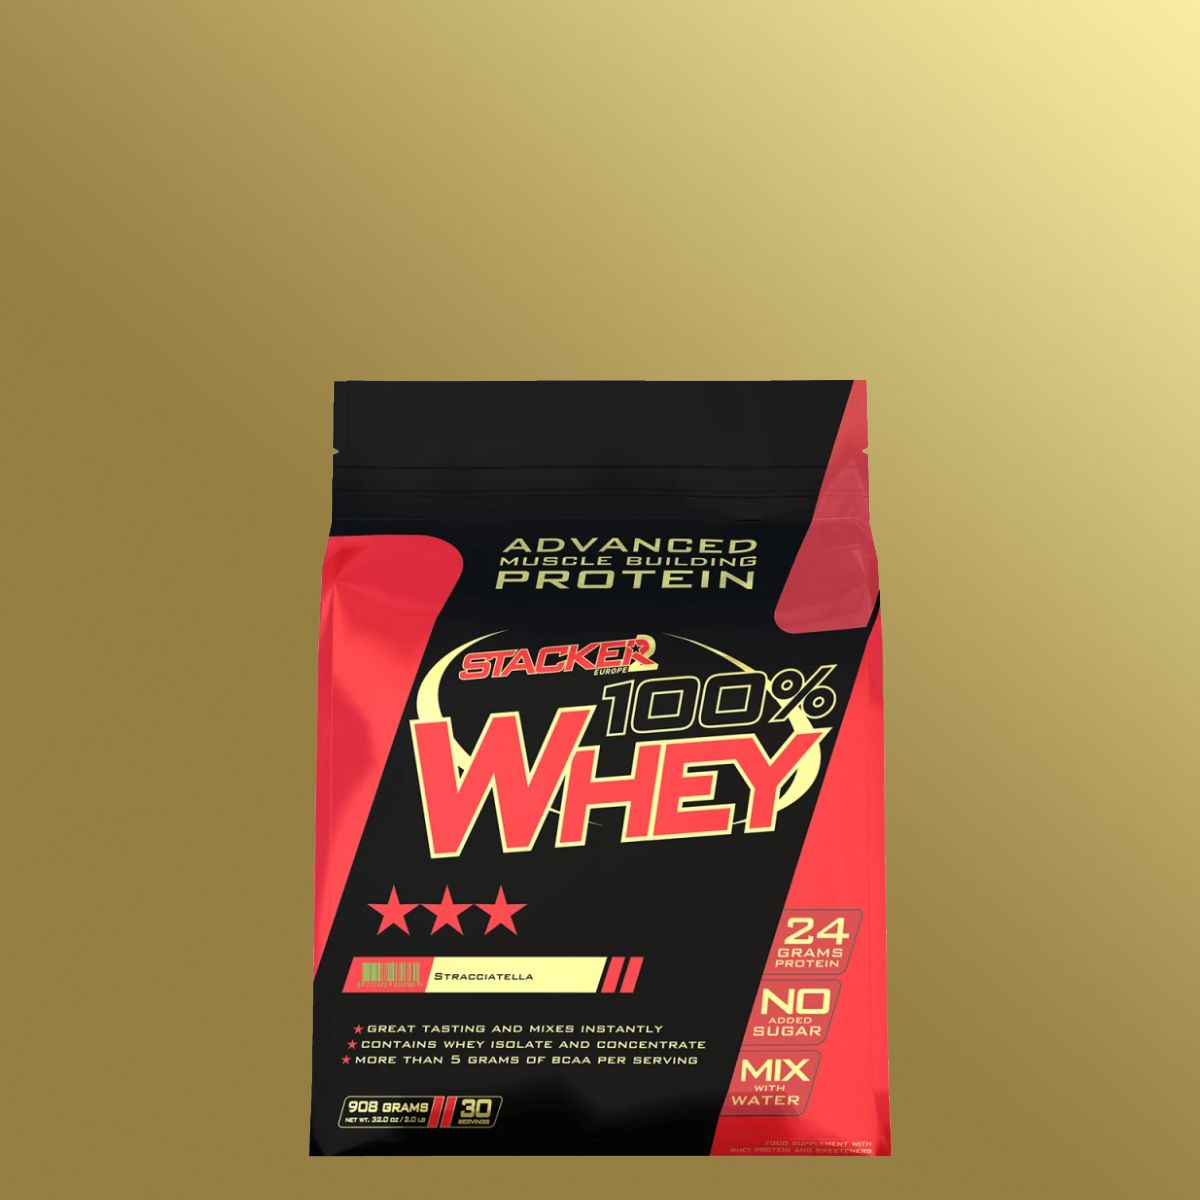 STACKER2 - 100% WHEY - ADVANCED MUSCLE BUILDING PROTEIN - 908 G